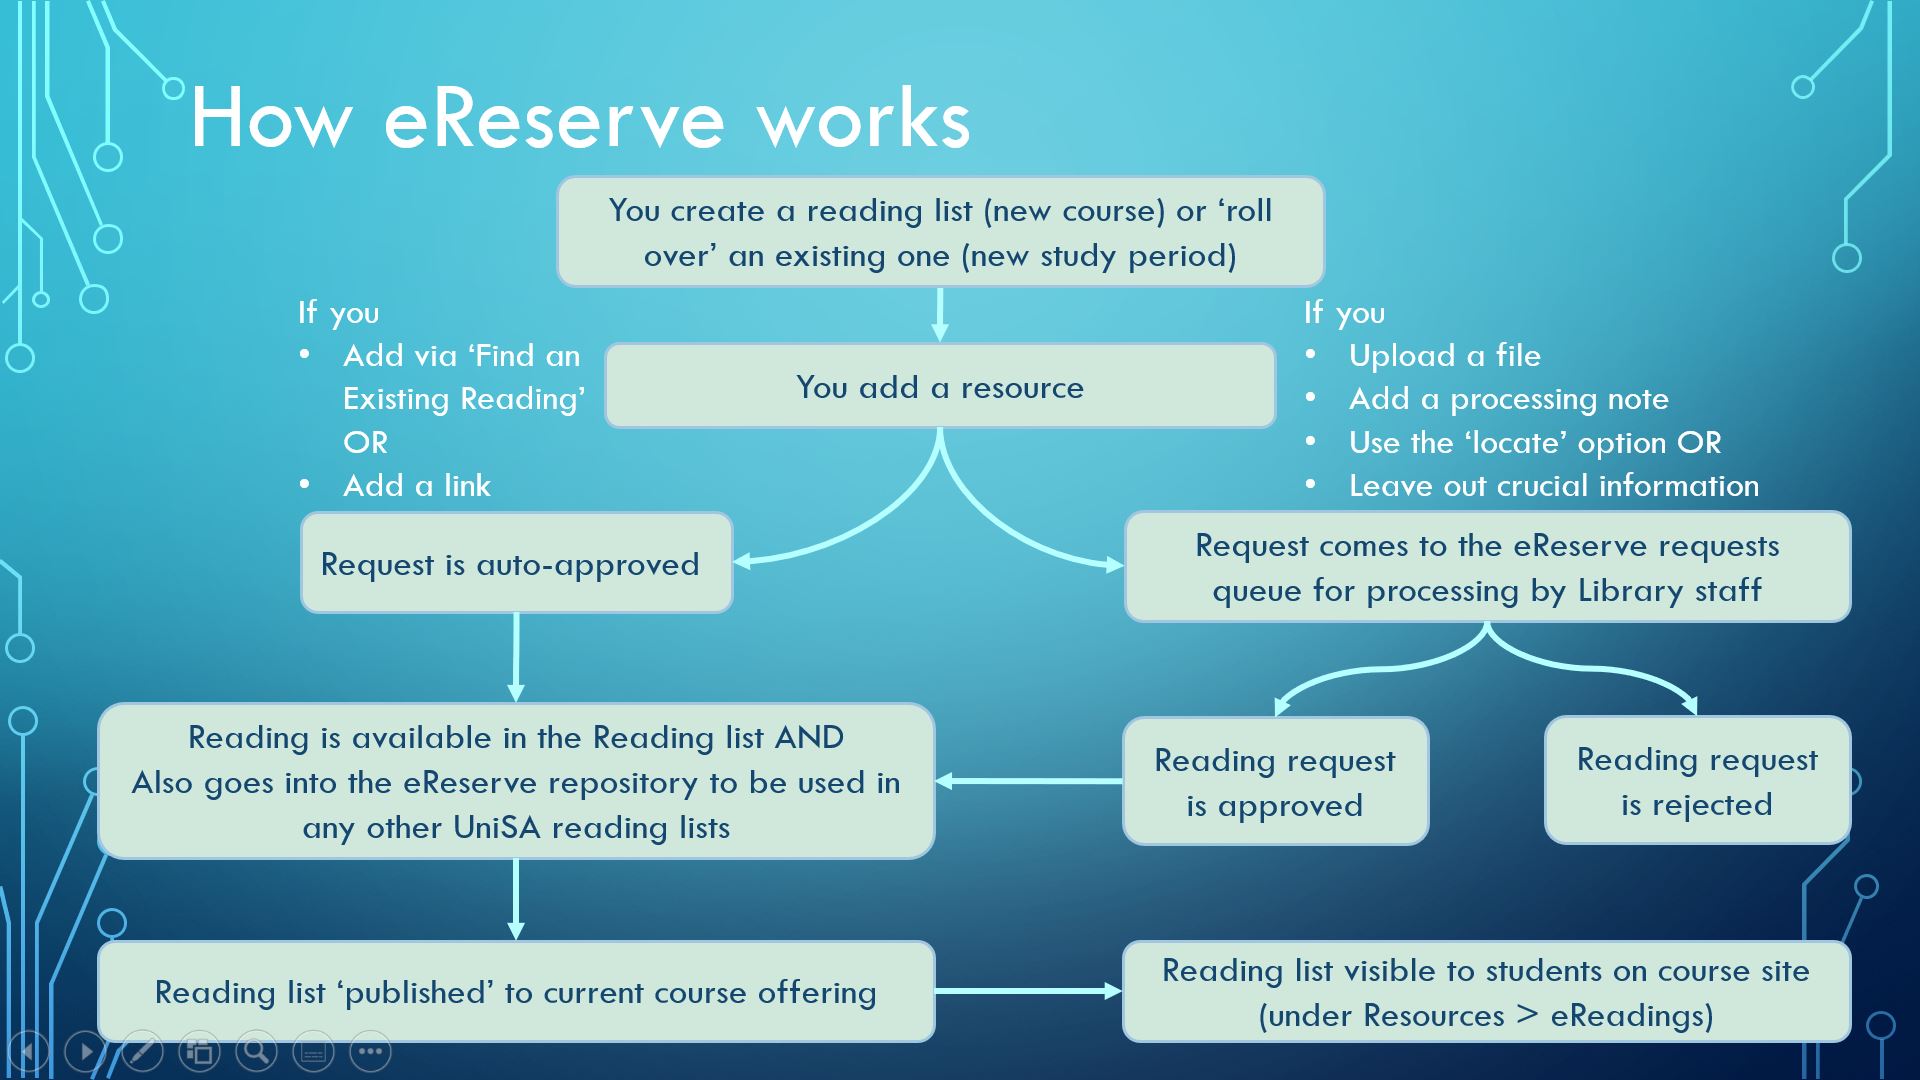 This is a flowchart summarising the approval process for readings. 